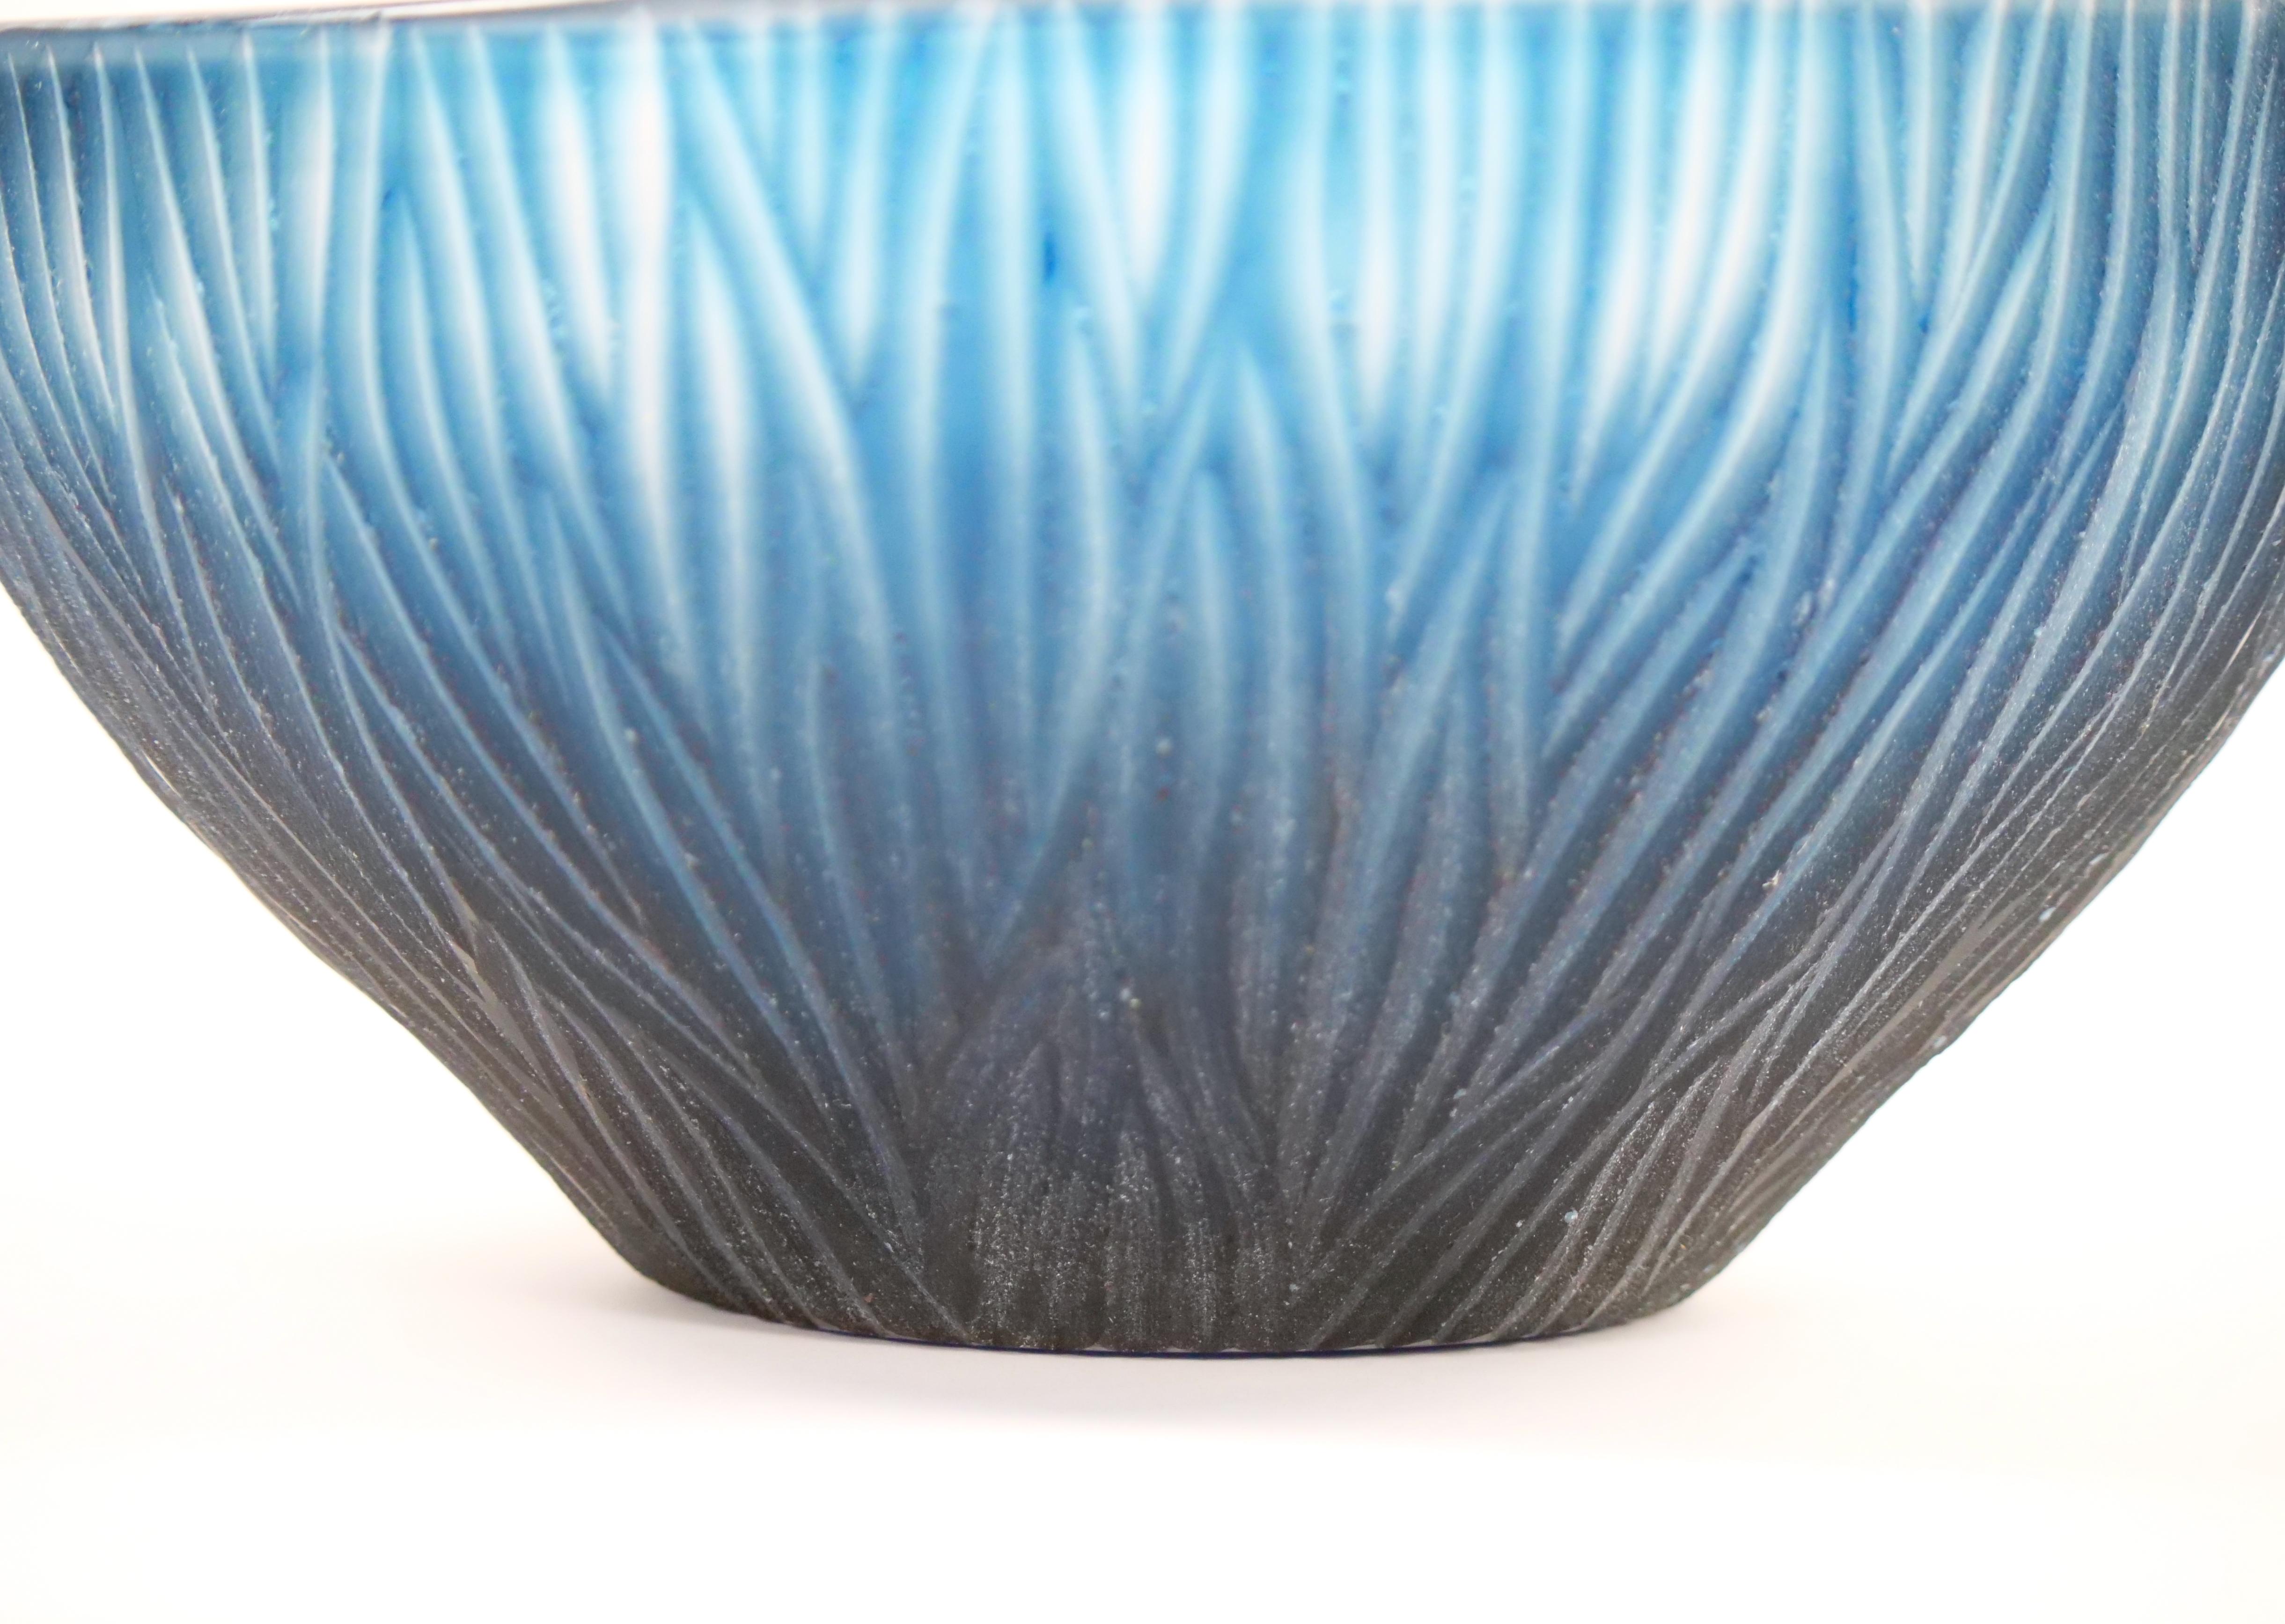  20th Century Blue Glass Centerpiece Bowl by Giampaolo Murano Italy For Sale 2